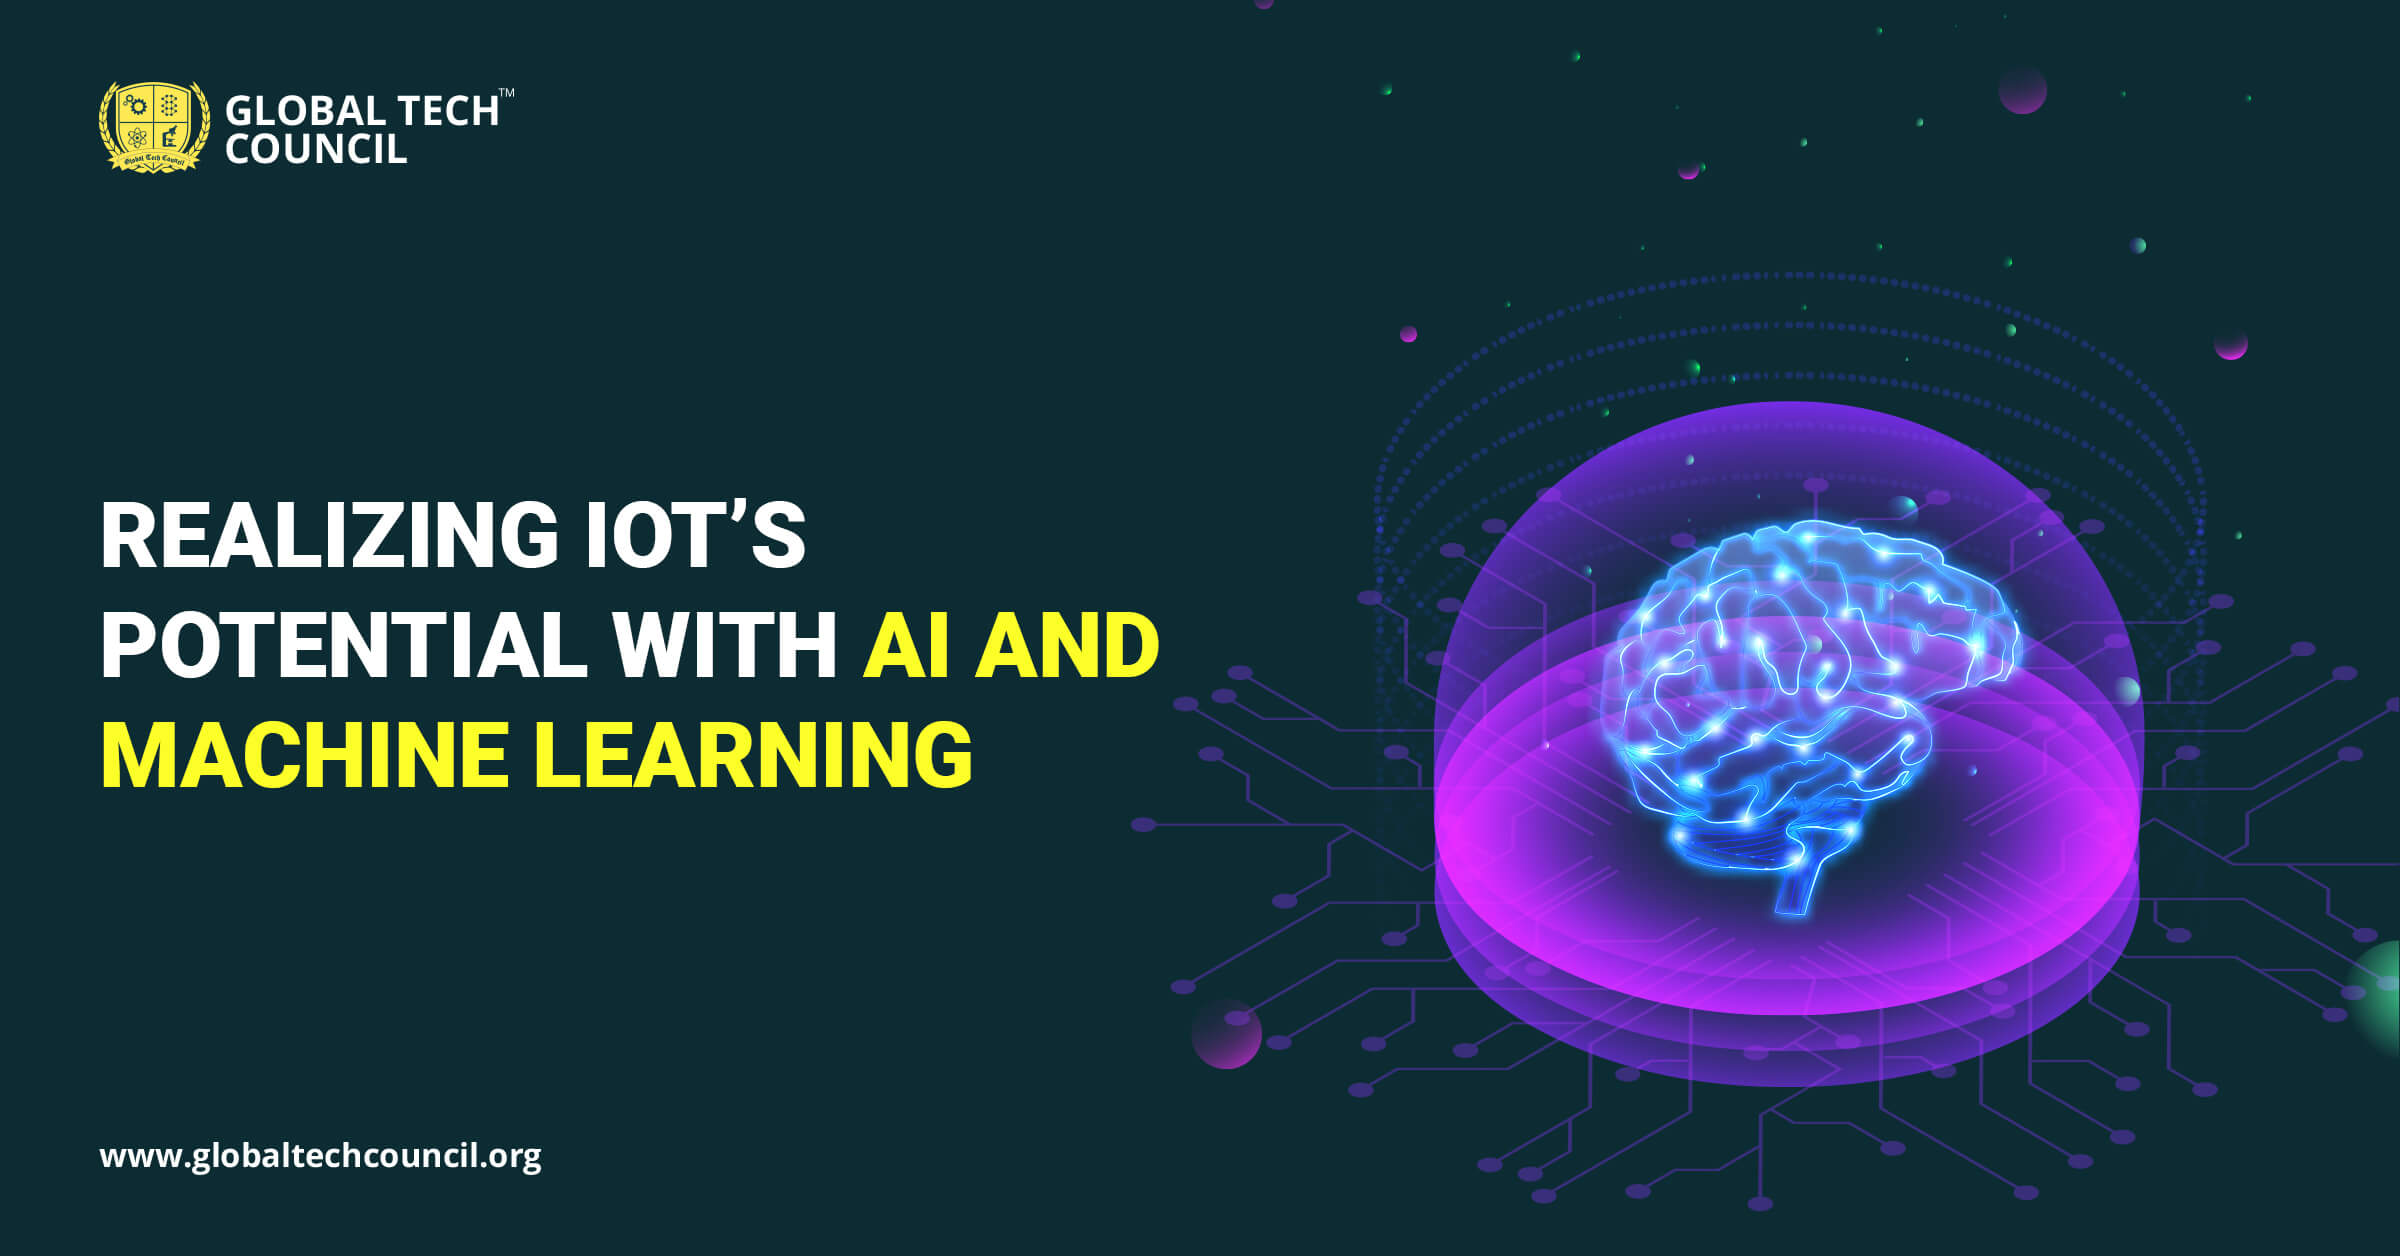 Realizing IoT’s potential with AI and machine learning